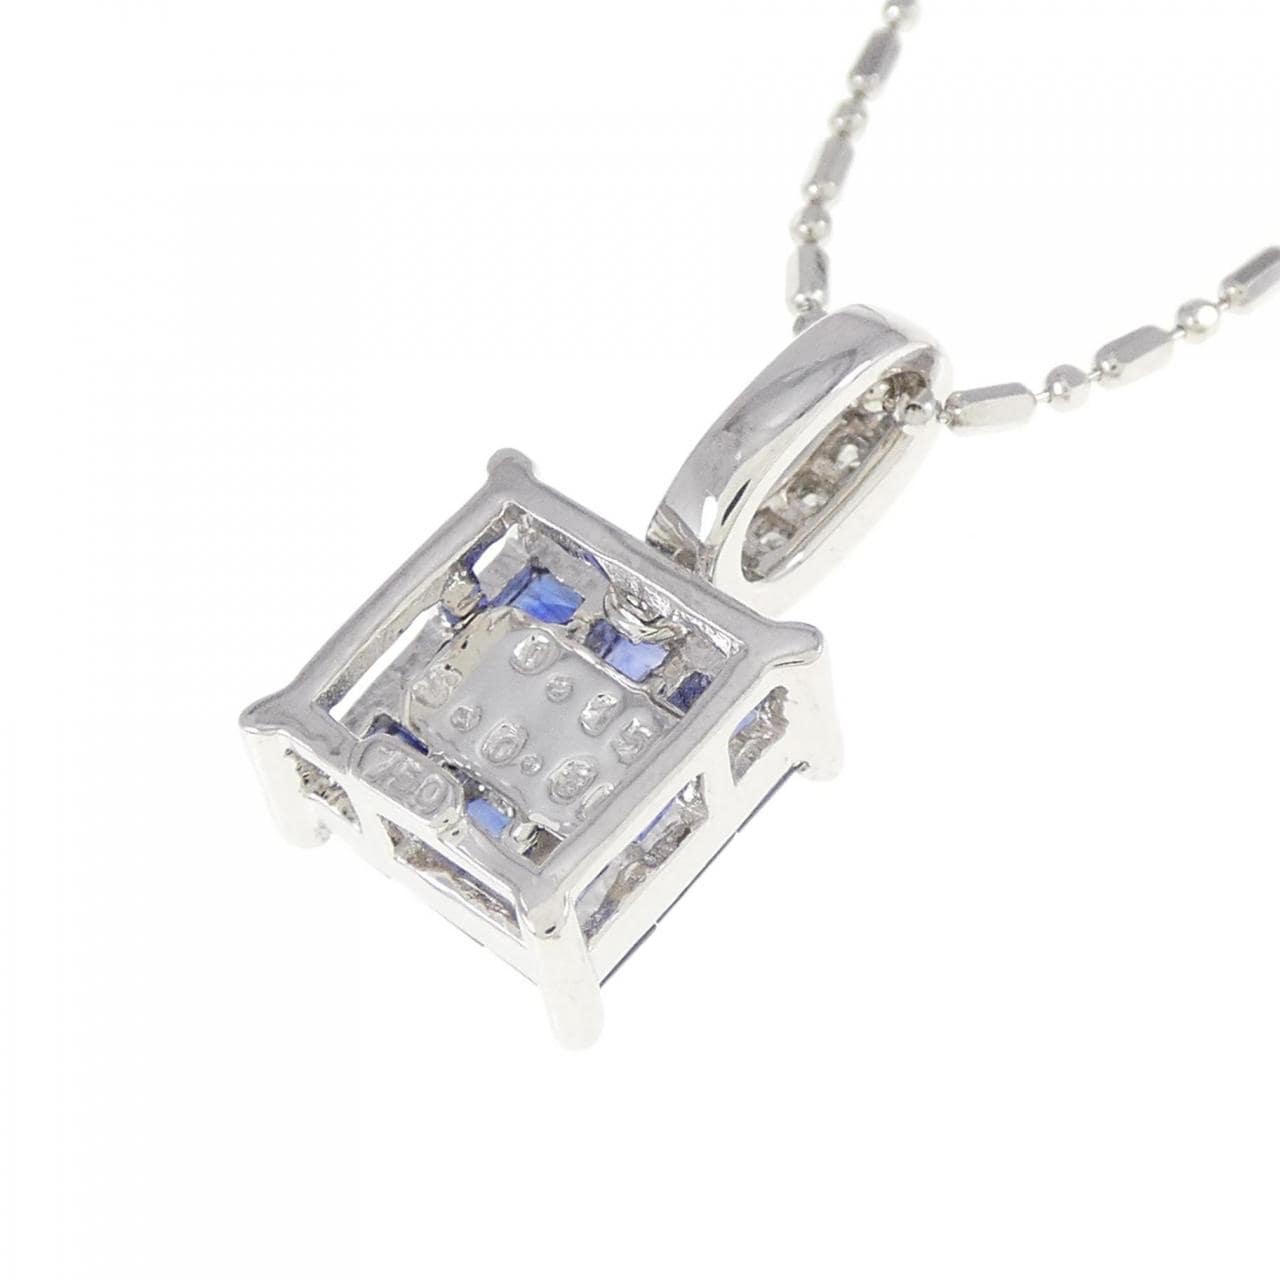 750WG Sapphire Necklace 0.80CT